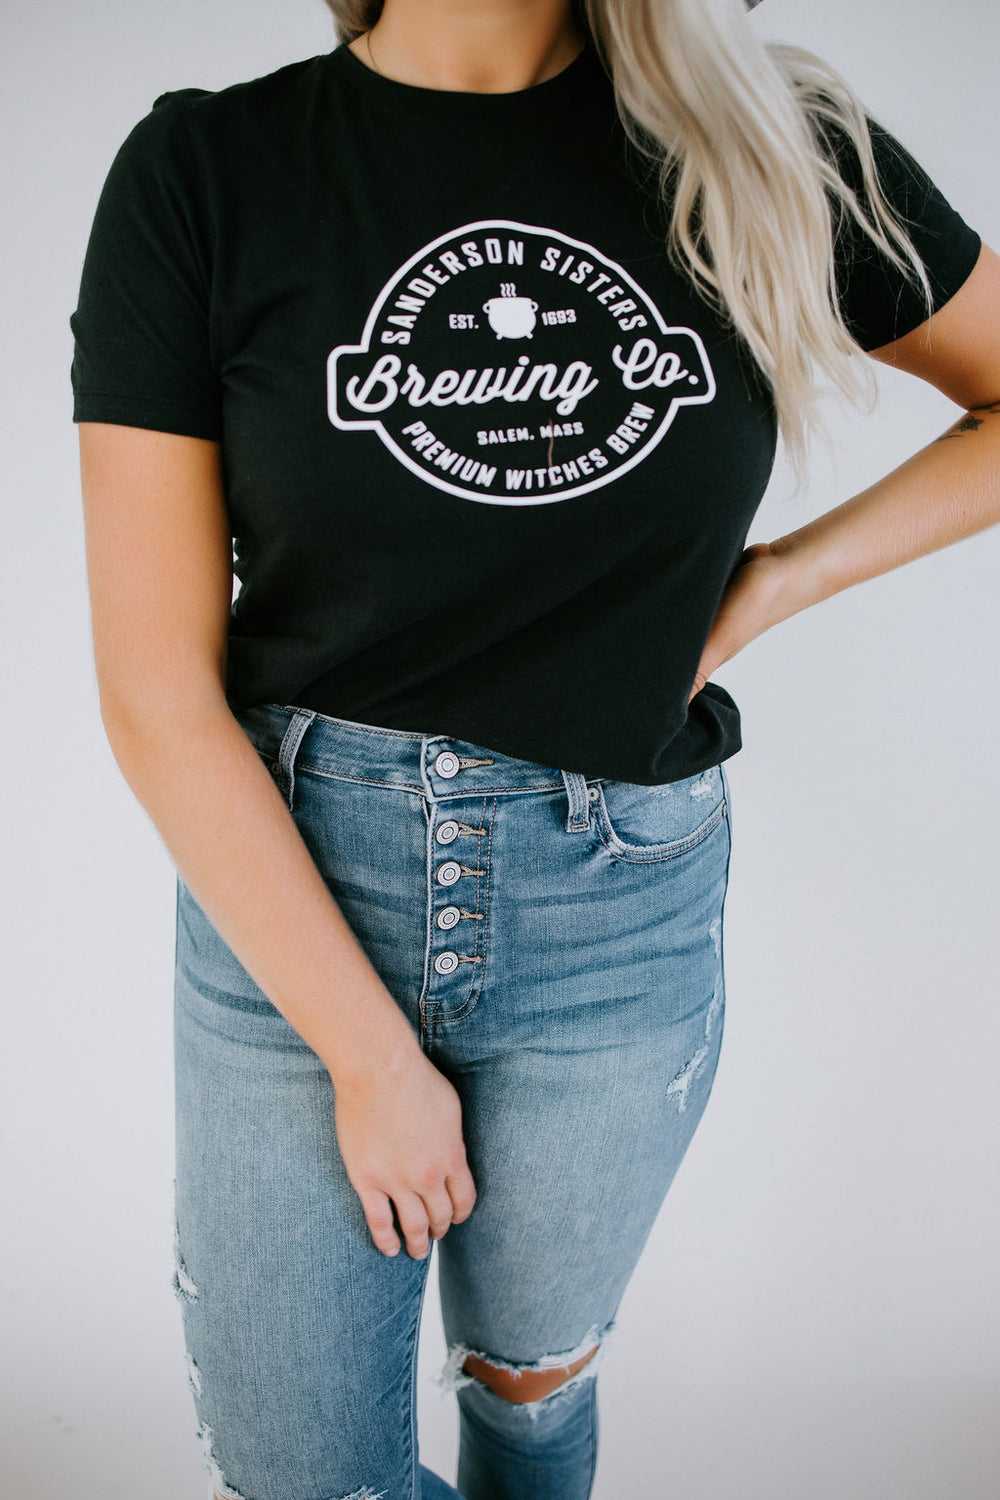 Sanderson Sister Brewing Co Graphic Tee